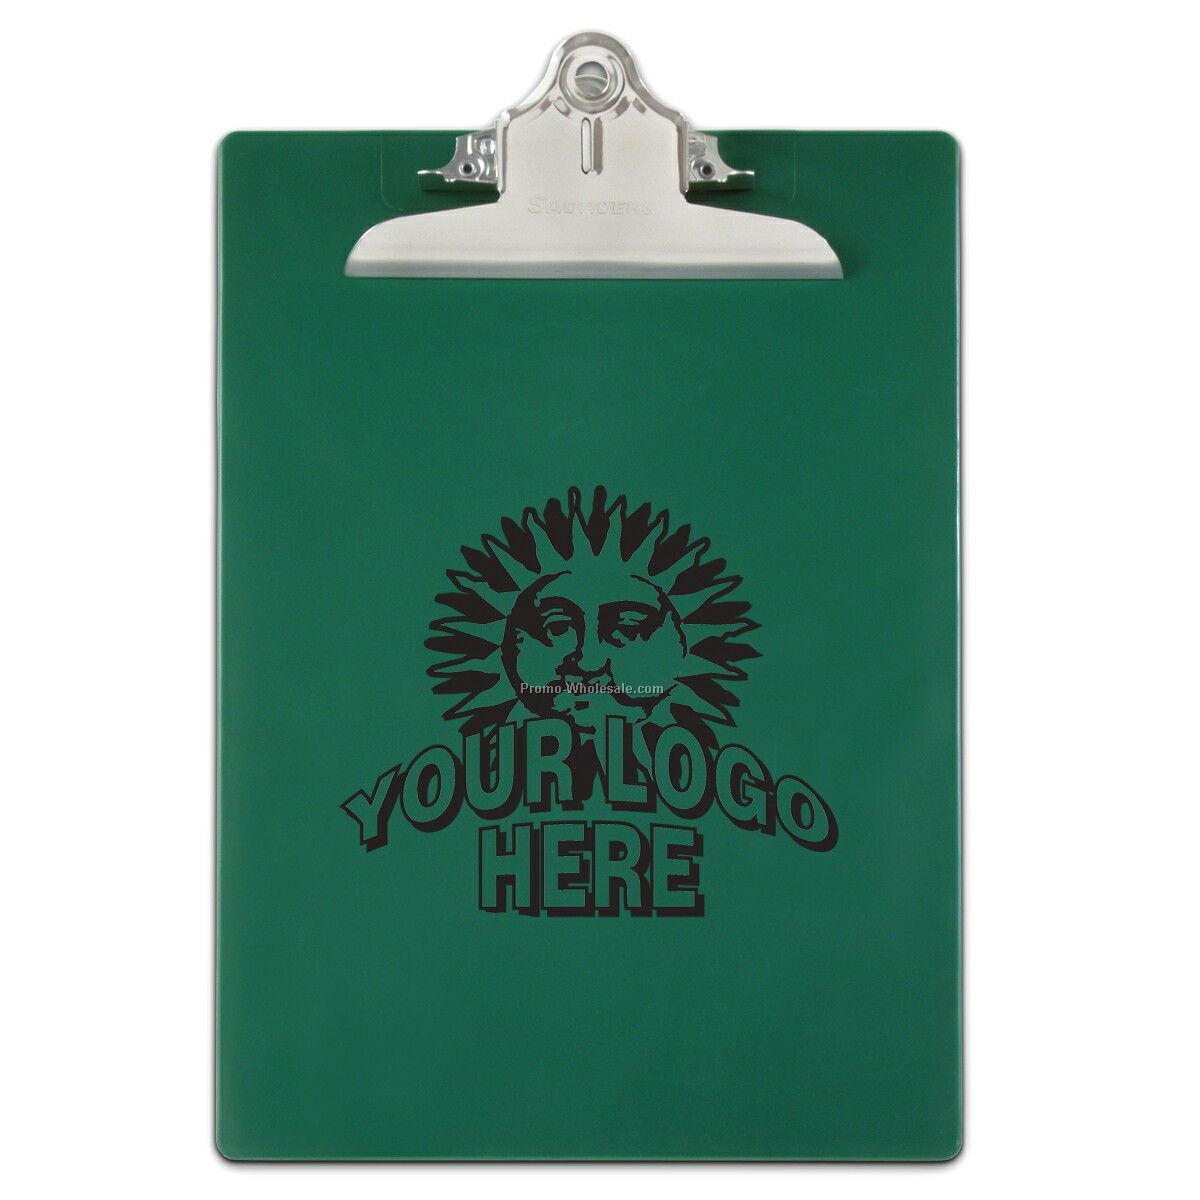 Antimicrobial Recycled Plastic Clipboard - Green